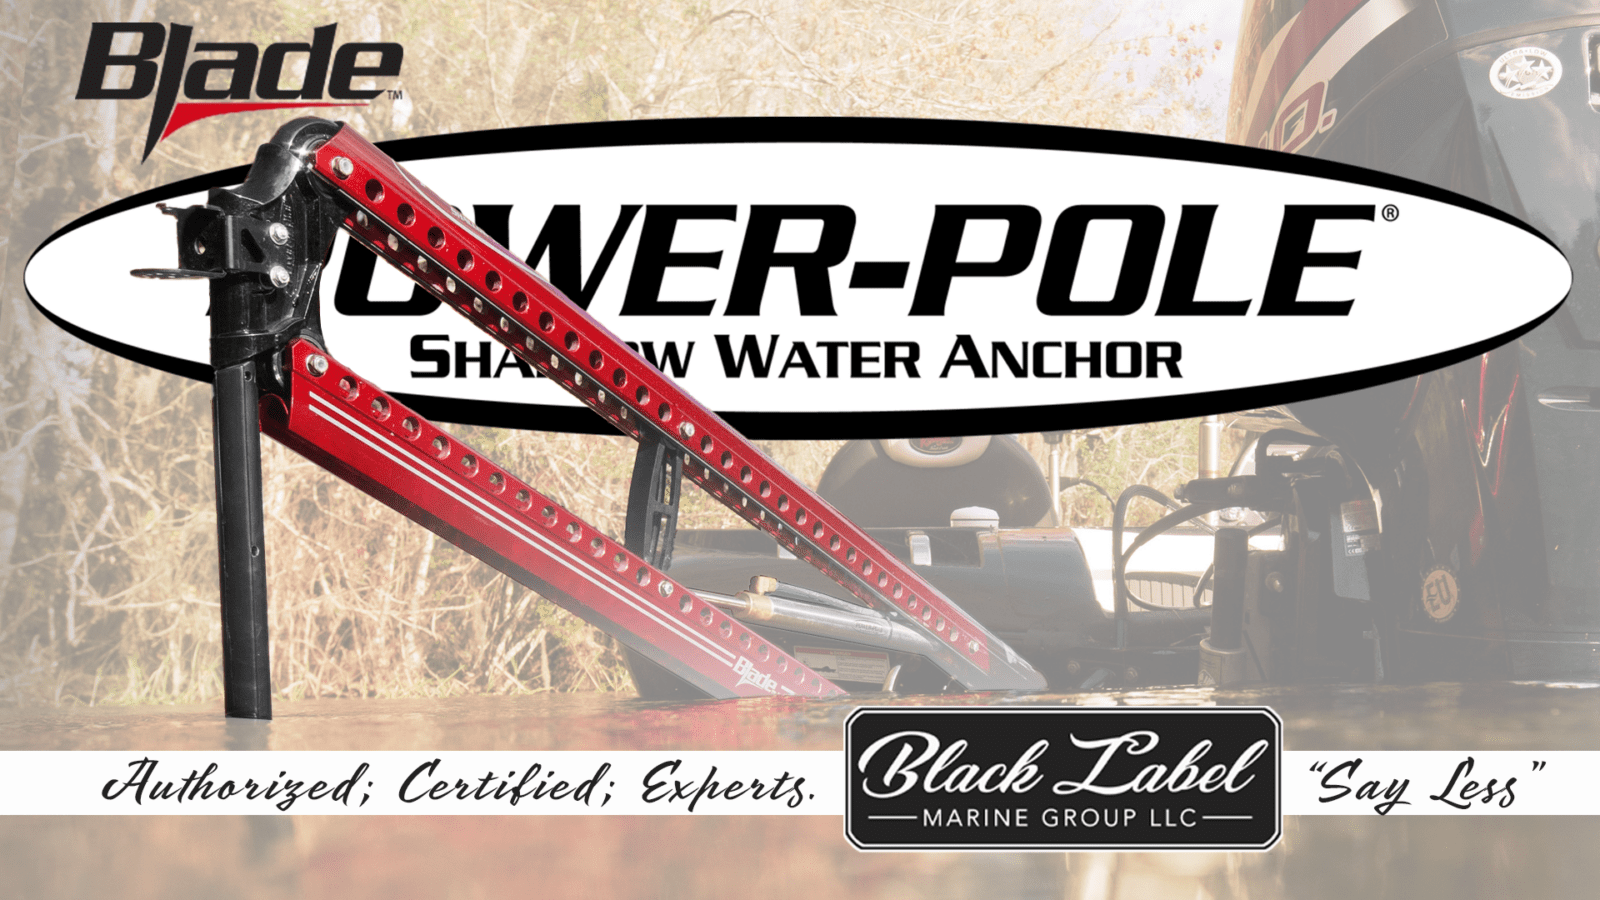 Power-Pole Blade Shallow Water Anchor